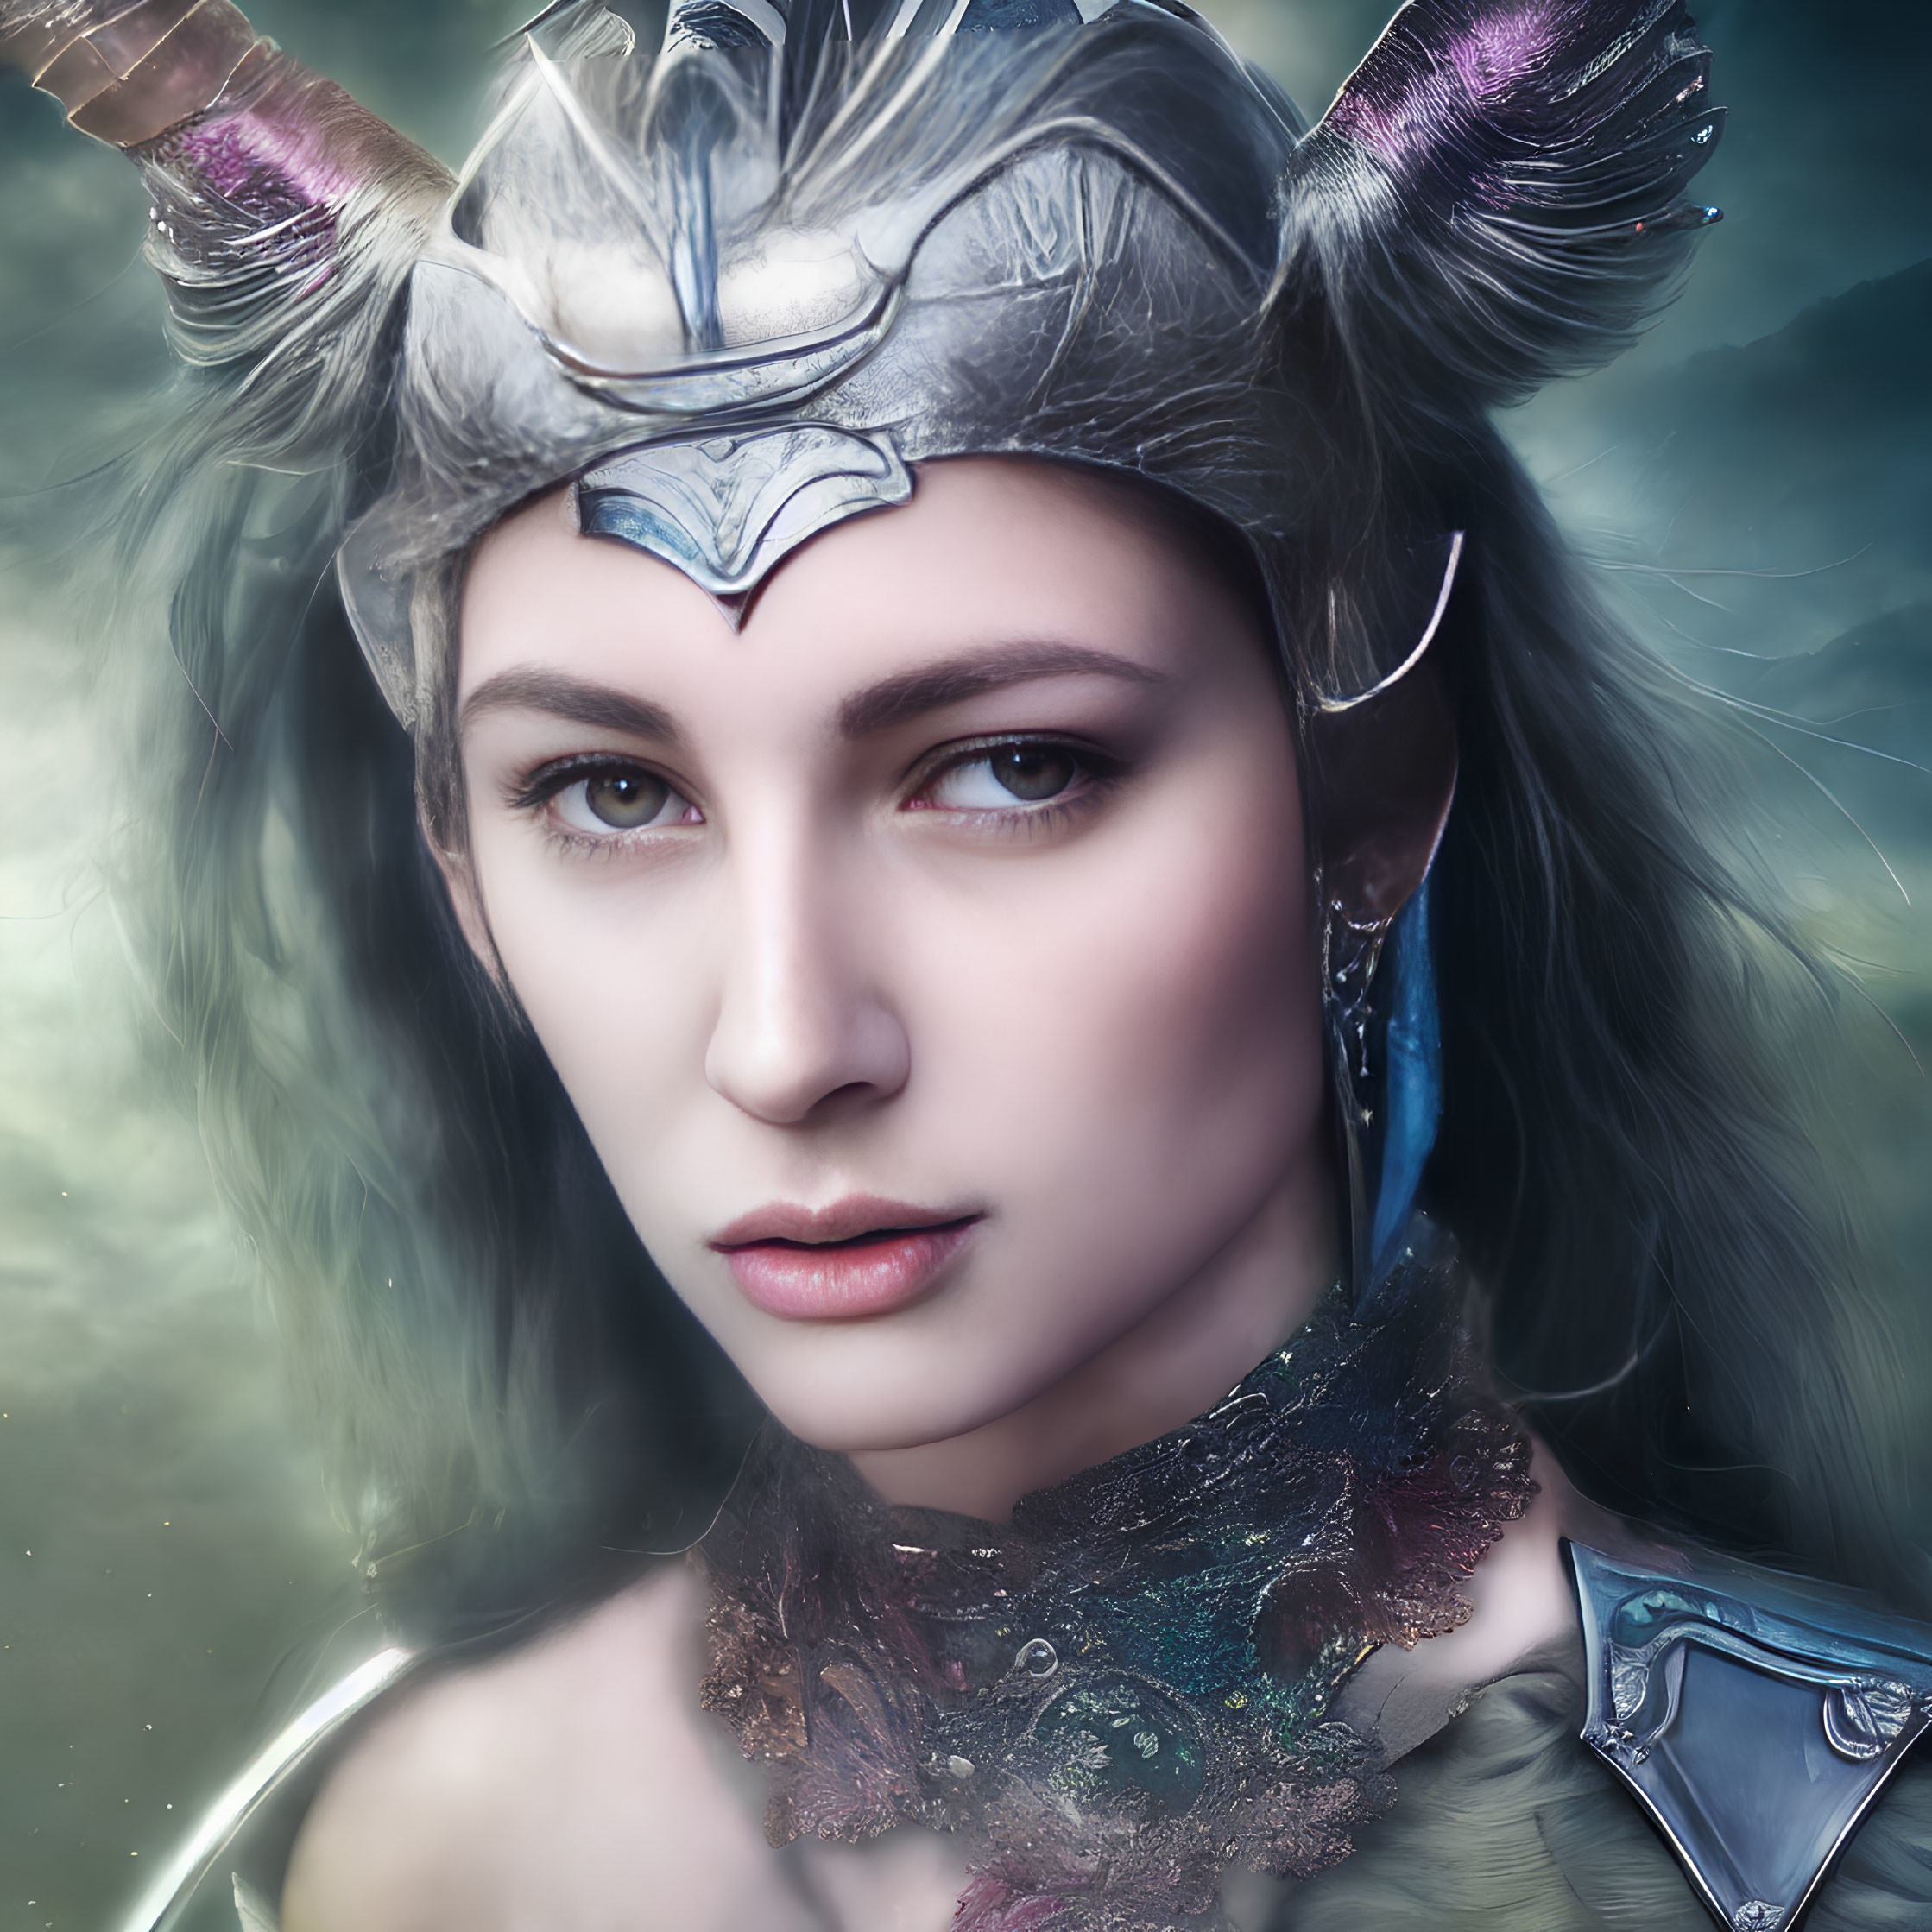 Digital artwork: Person in fantasy armor with horned helmet, determined expression, ethereal background.